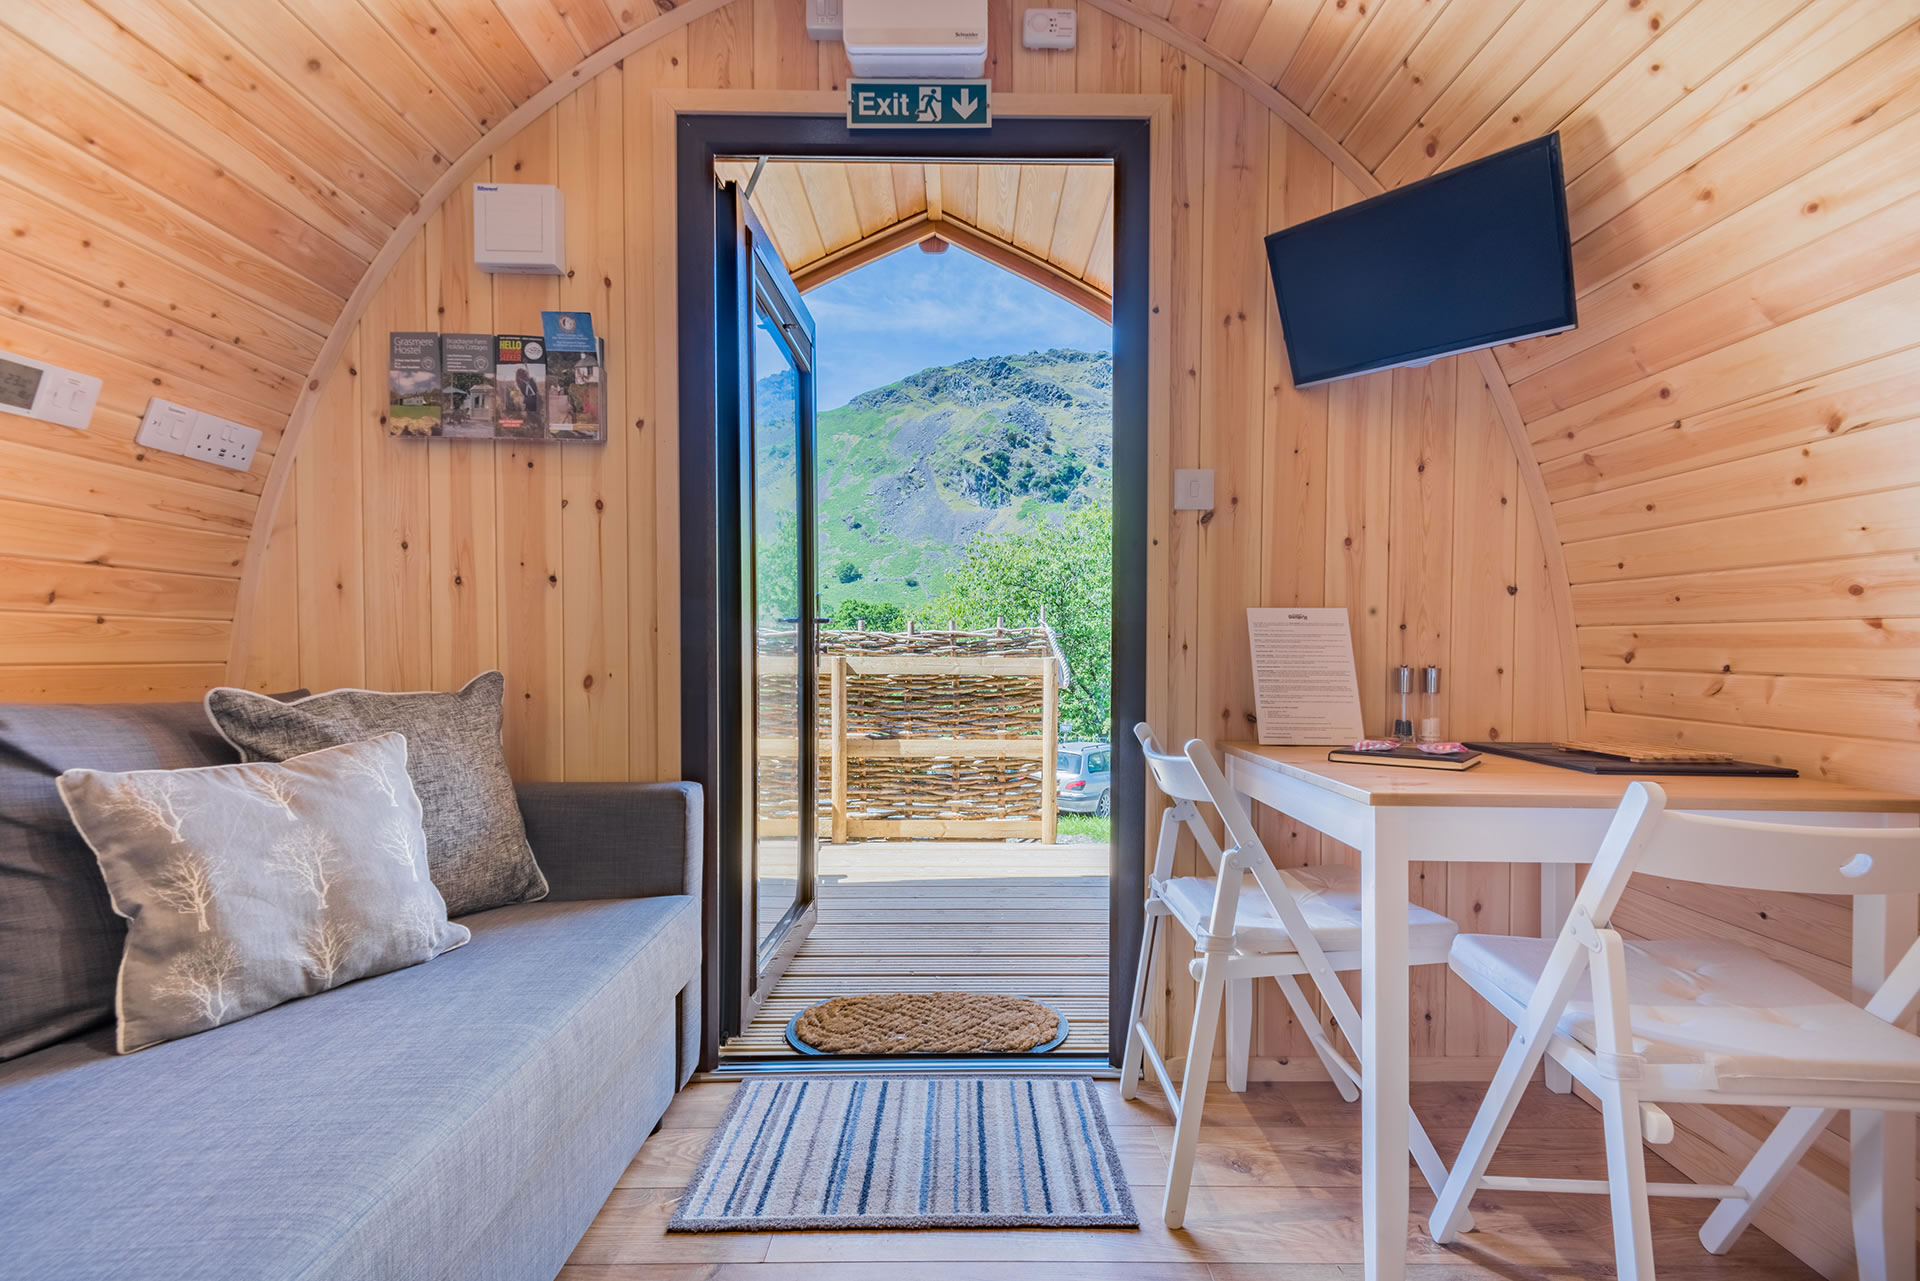 Romantic view of the fells from our Lake district pod